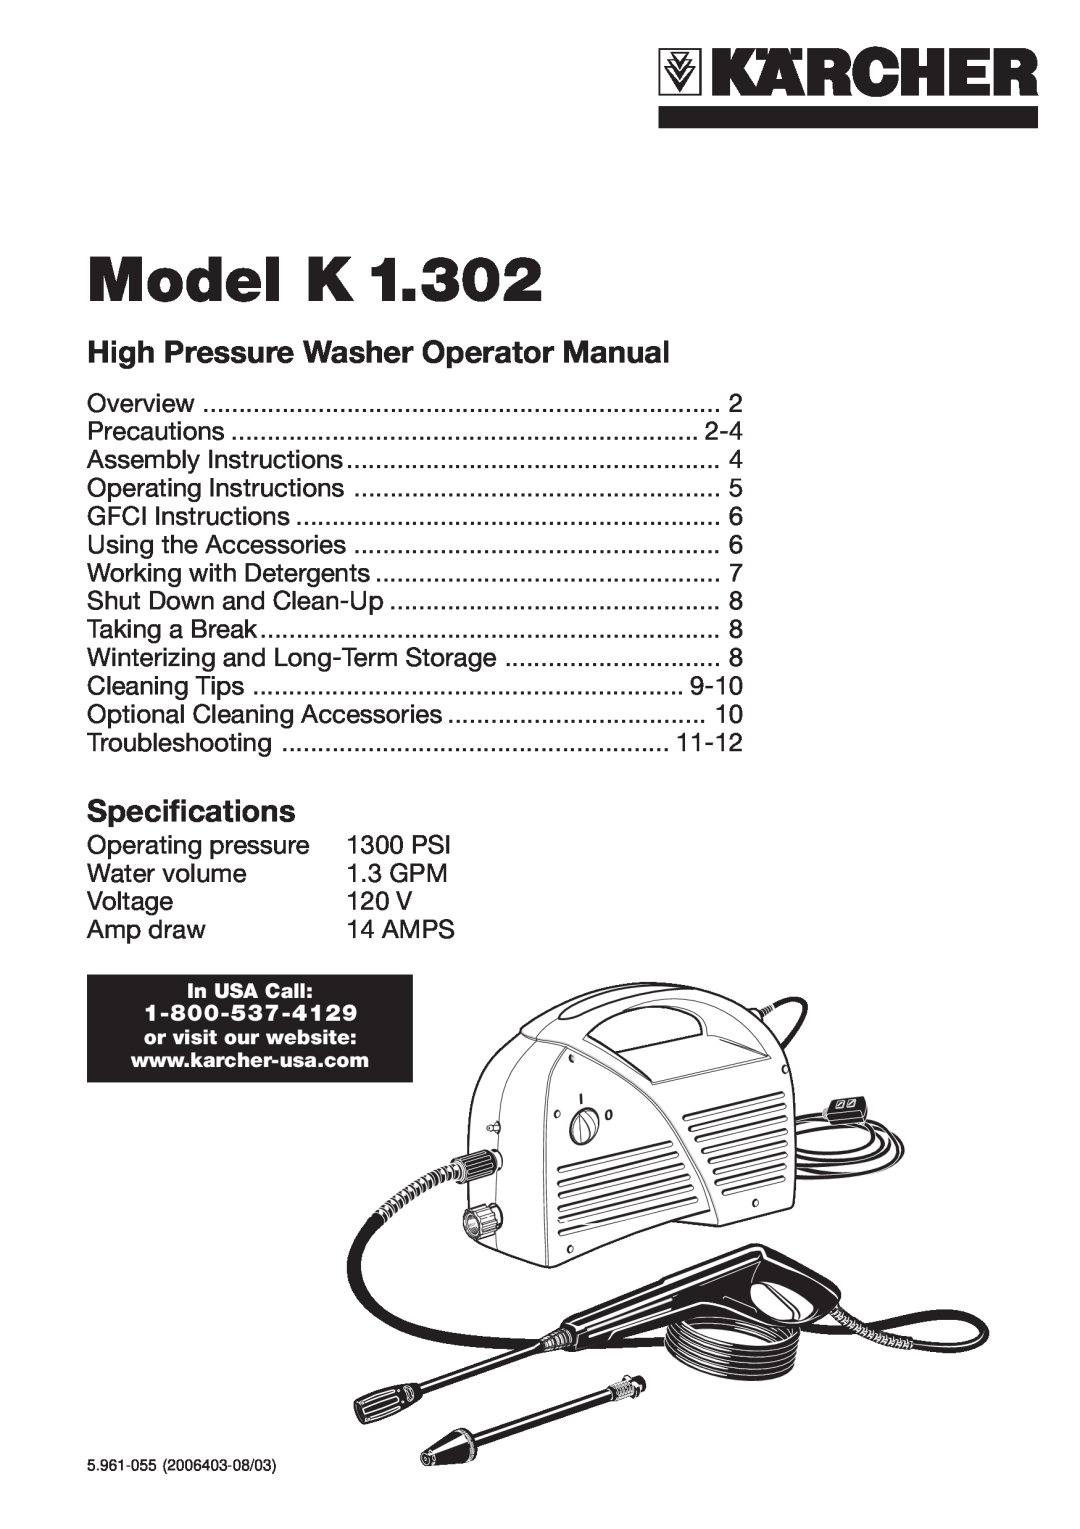 Karcher K 1.302 specifications Model K, High Pressure Washer Operator Manual, Specifications 